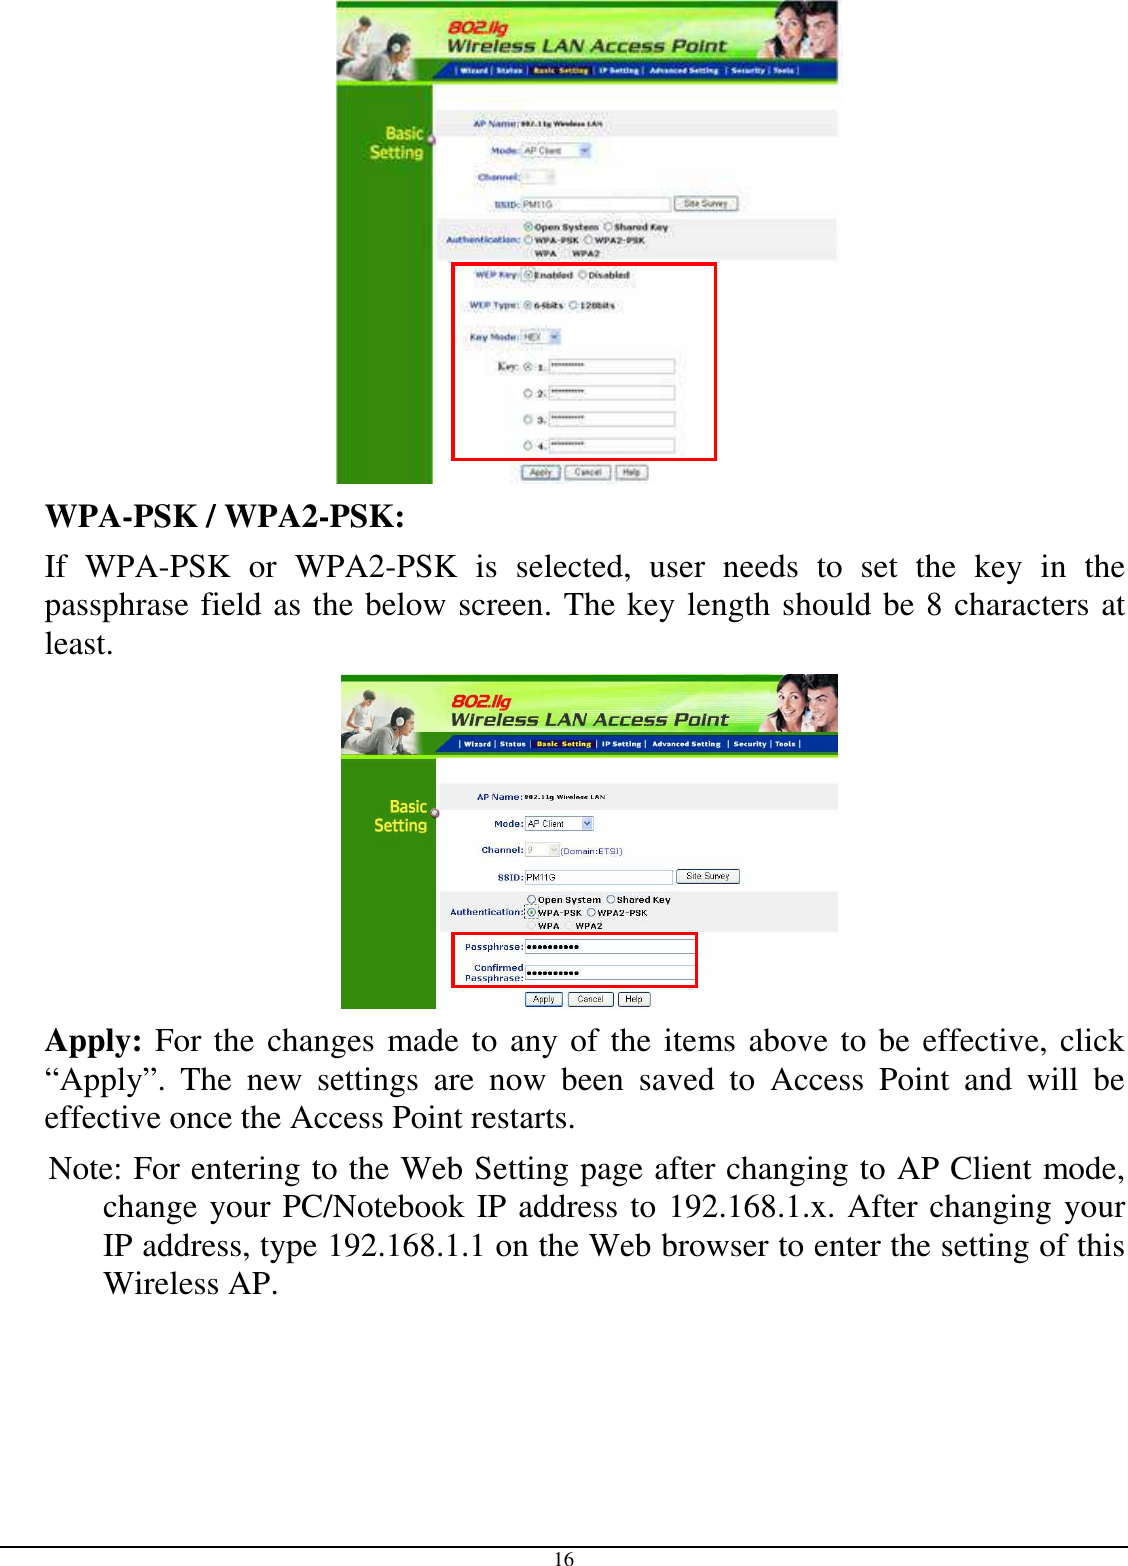  16    WPA-PSK / WPA2-PSK:    If  WPA-PSK  or  WPA2-PSK  is  selected,  user  needs  to  set  the  key  in  the passphrase field as the below screen. The key length should be 8 characters at least.    Apply: For the changes made to any of the items above to be effective, click “Apply”.  The  new  settings  are  now  been  saved  to  Access  Point  and  will  be effective once the Access Point restarts.       Note: For entering to the Web Setting page after changing to AP Client mode, change your PC/Notebook IP address to 192.168.1.x. After changing your IP address, type 192.168.1.1 on the Web browser to enter the setting of this Wireless AP. 